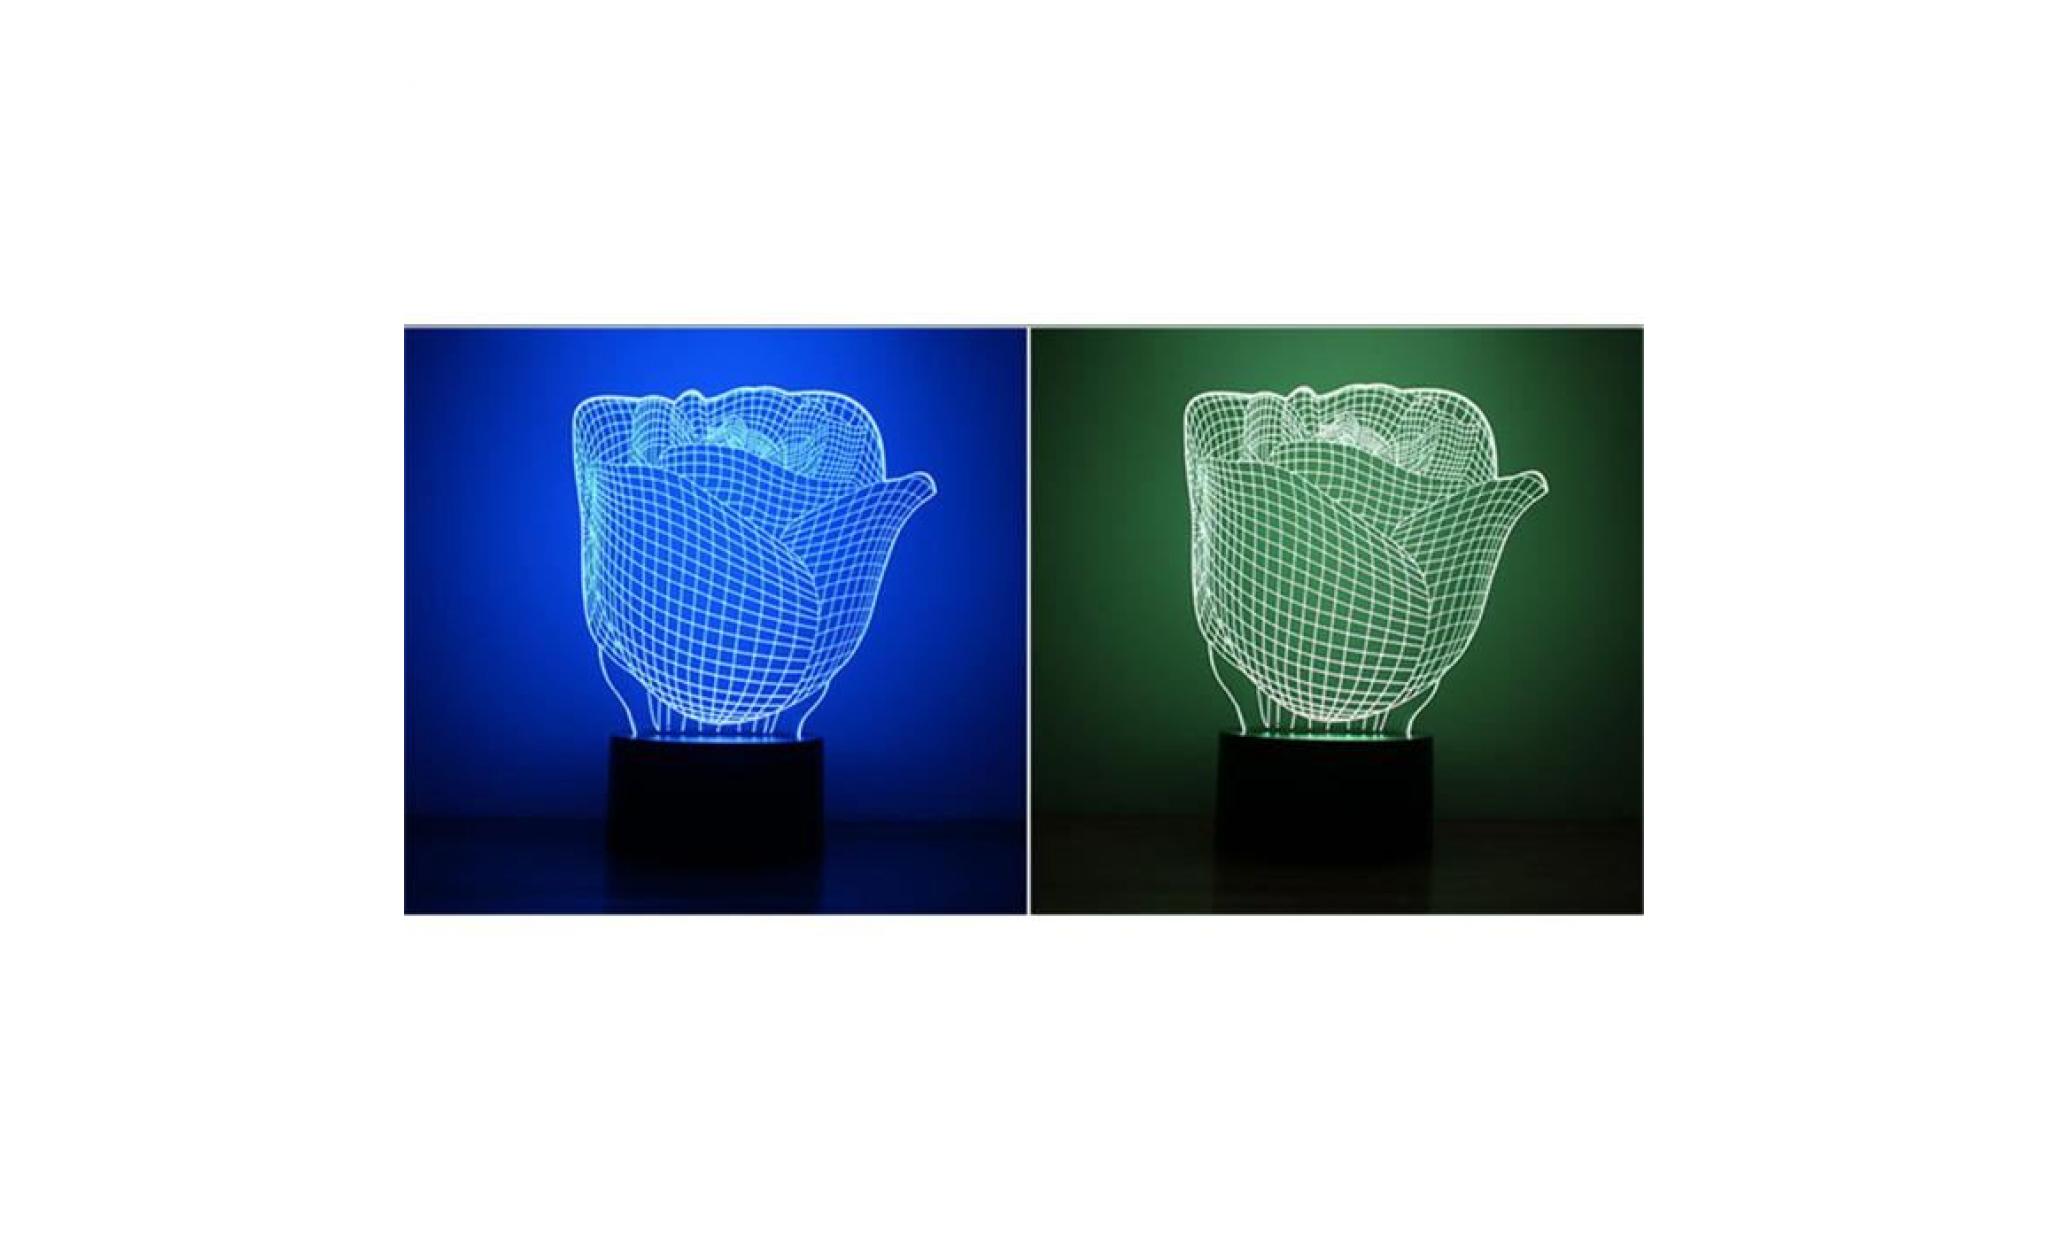 rose 3d led night light lamps  3d optical illusion 7 colors for home pageare1805 pageare1805 pas cher